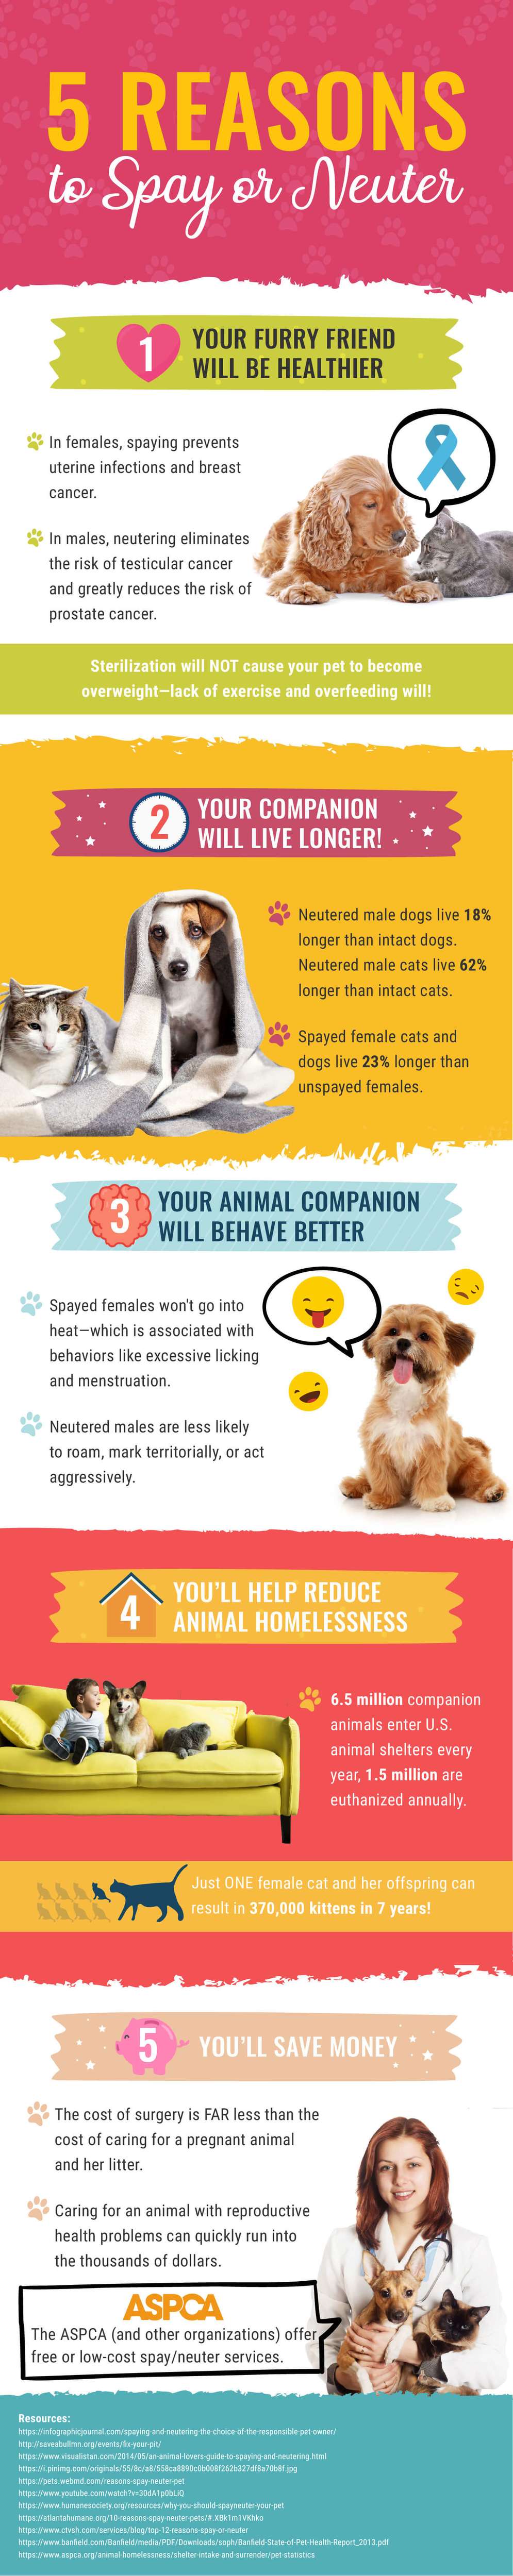 is it good to neuter your dog